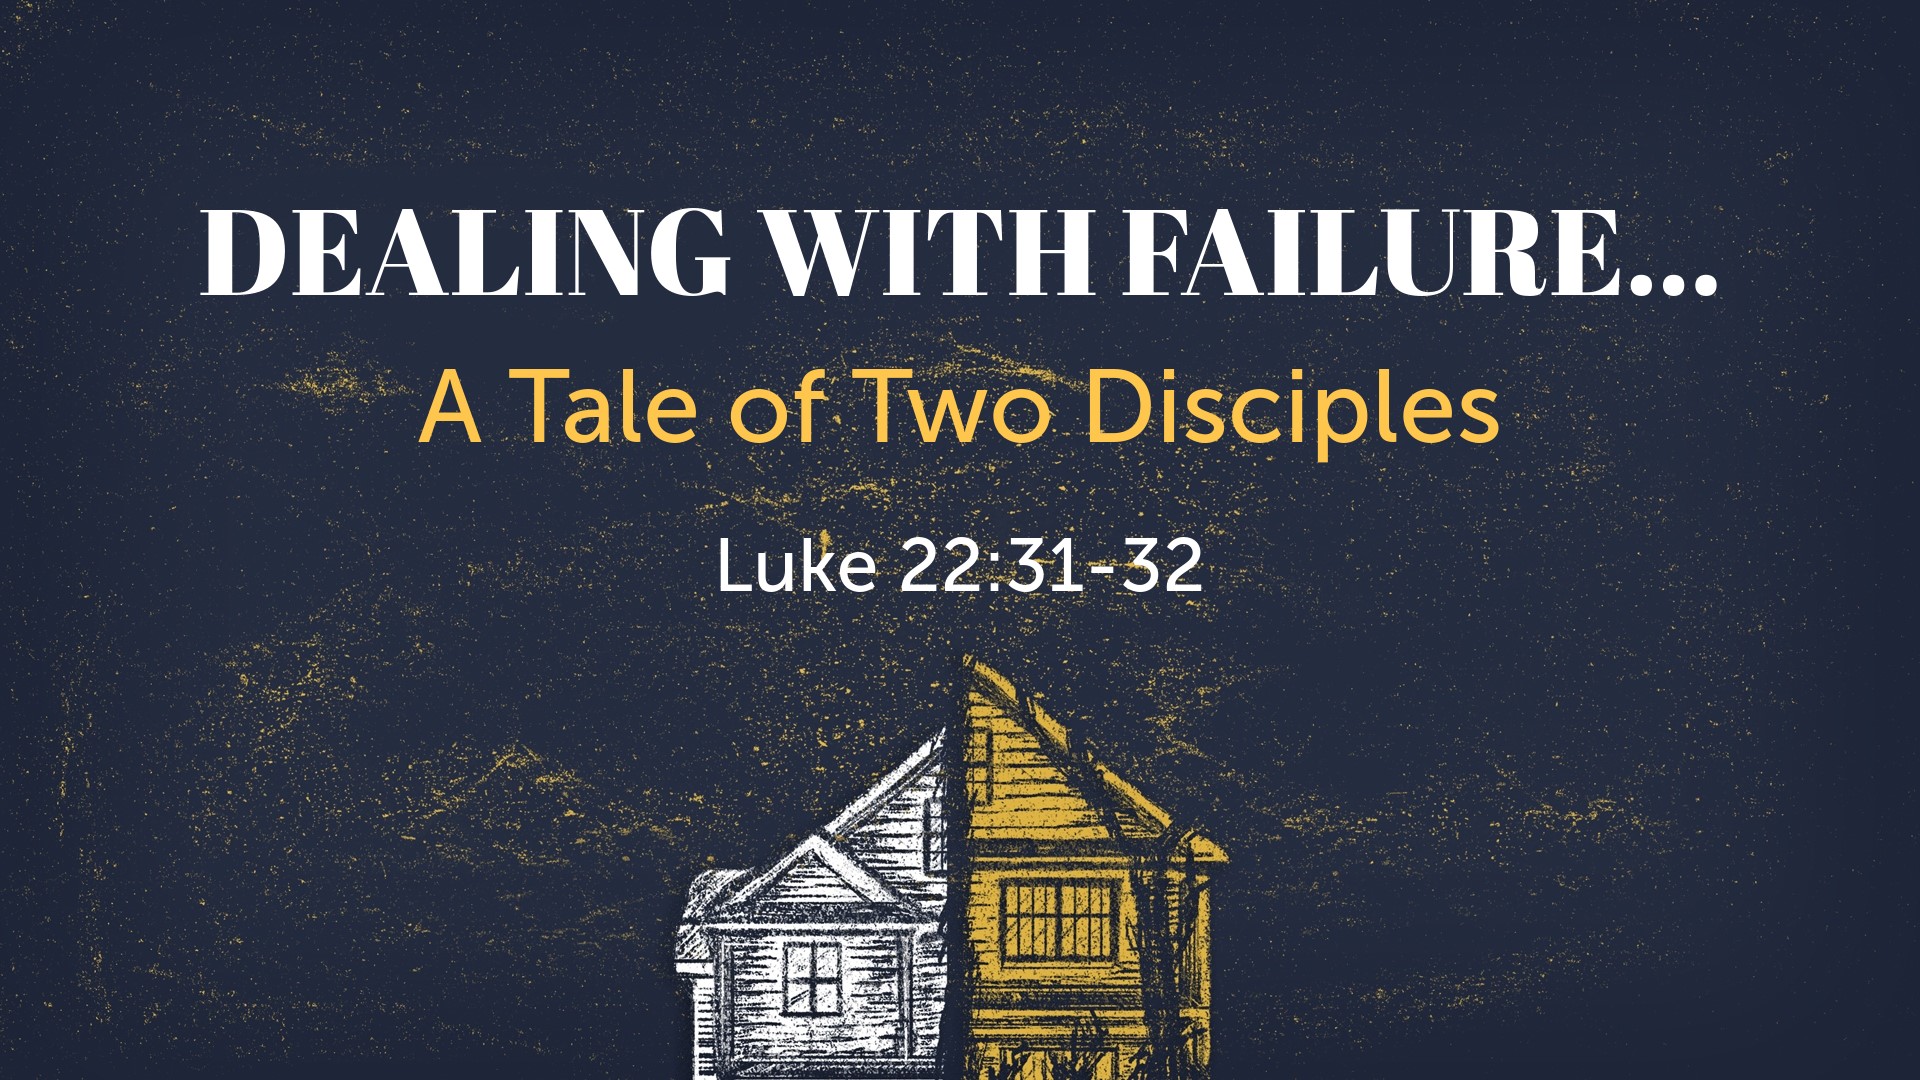 Dealing With Failure...A Tale of Two Disciples